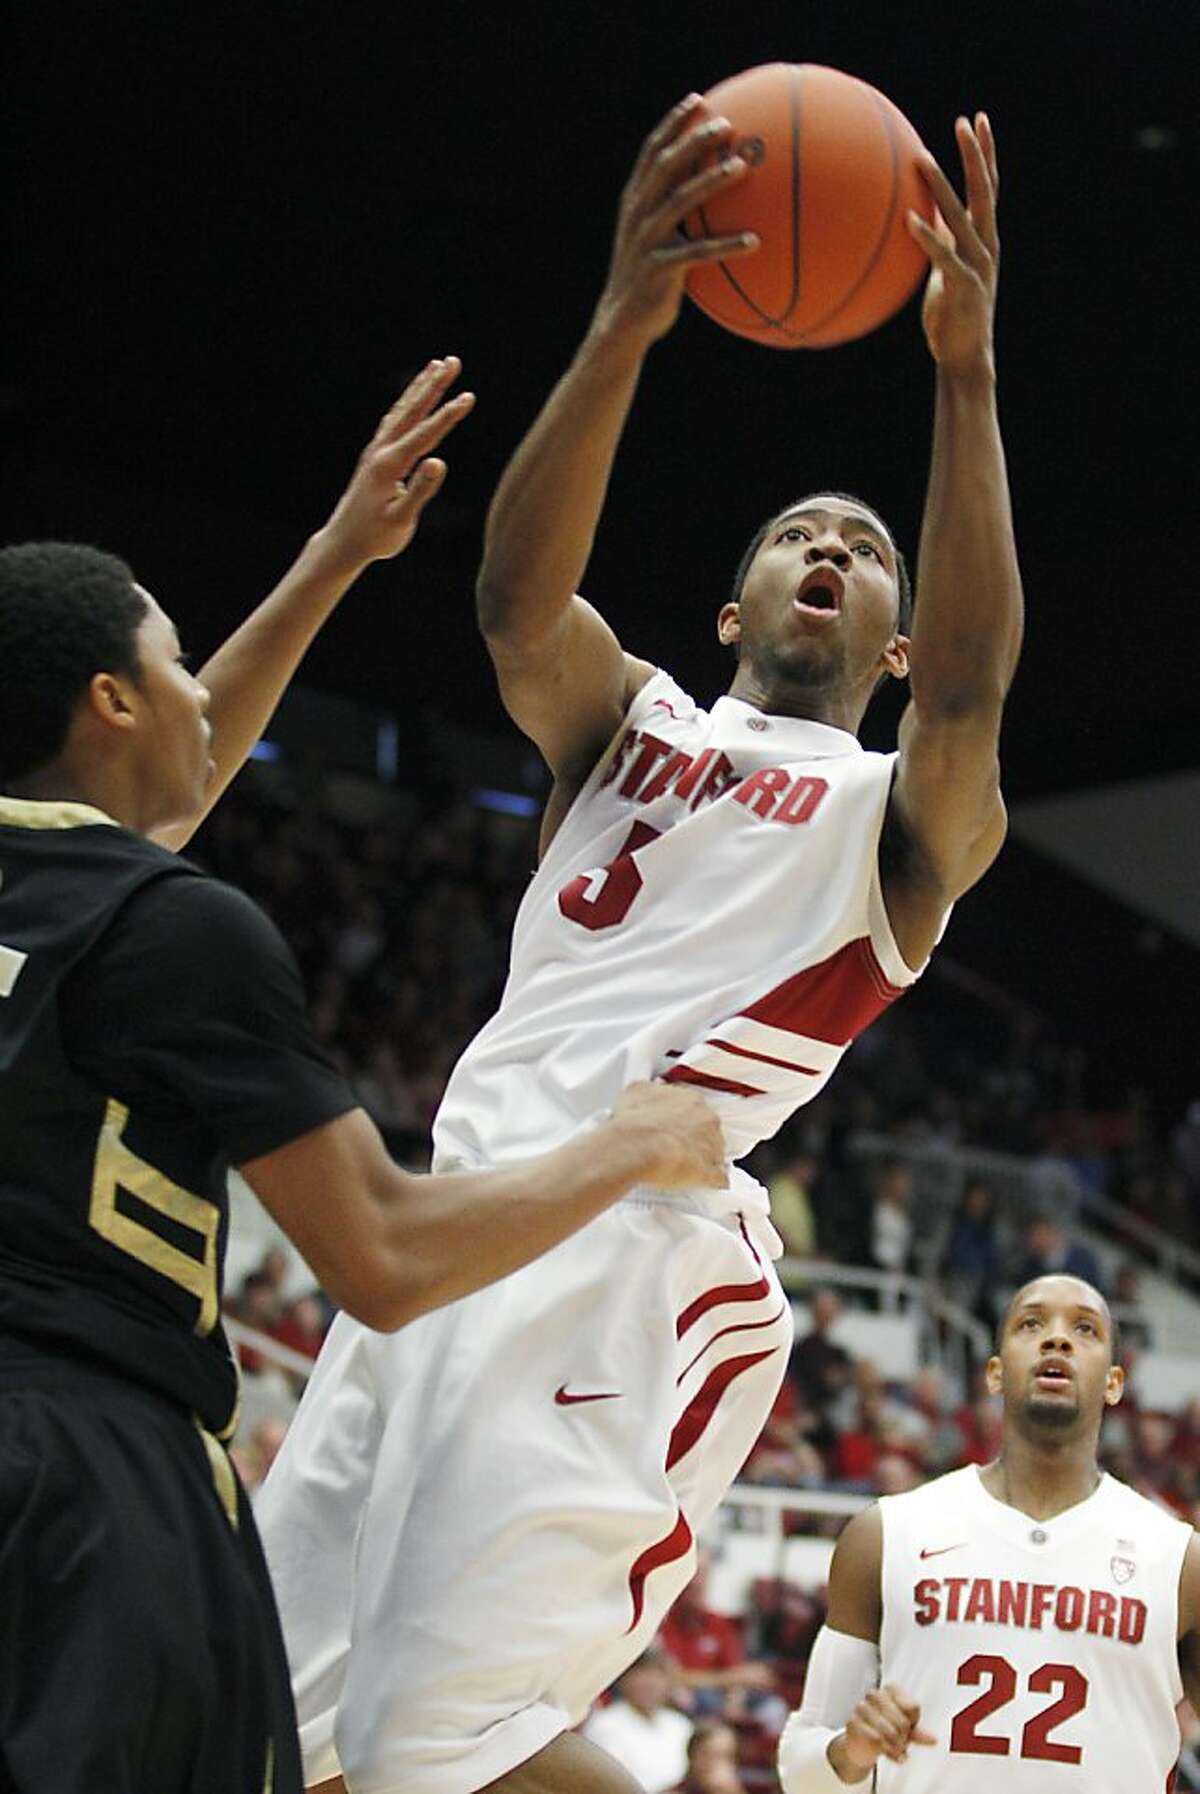 CORRECTS STANFORD PLAYER NAME TO CHASSON RANDLE (5), NOT ANTHONY BROWN (3) - Stanford's Chasson Randle (5) drives to the basket against Colorado's Spencer Dinwiddie, left, in the first half of an NCAA college basketball game on Saturday, Jan. 14, 2012, in Stanford, Calif. (AP Photo/Tony Avelar)